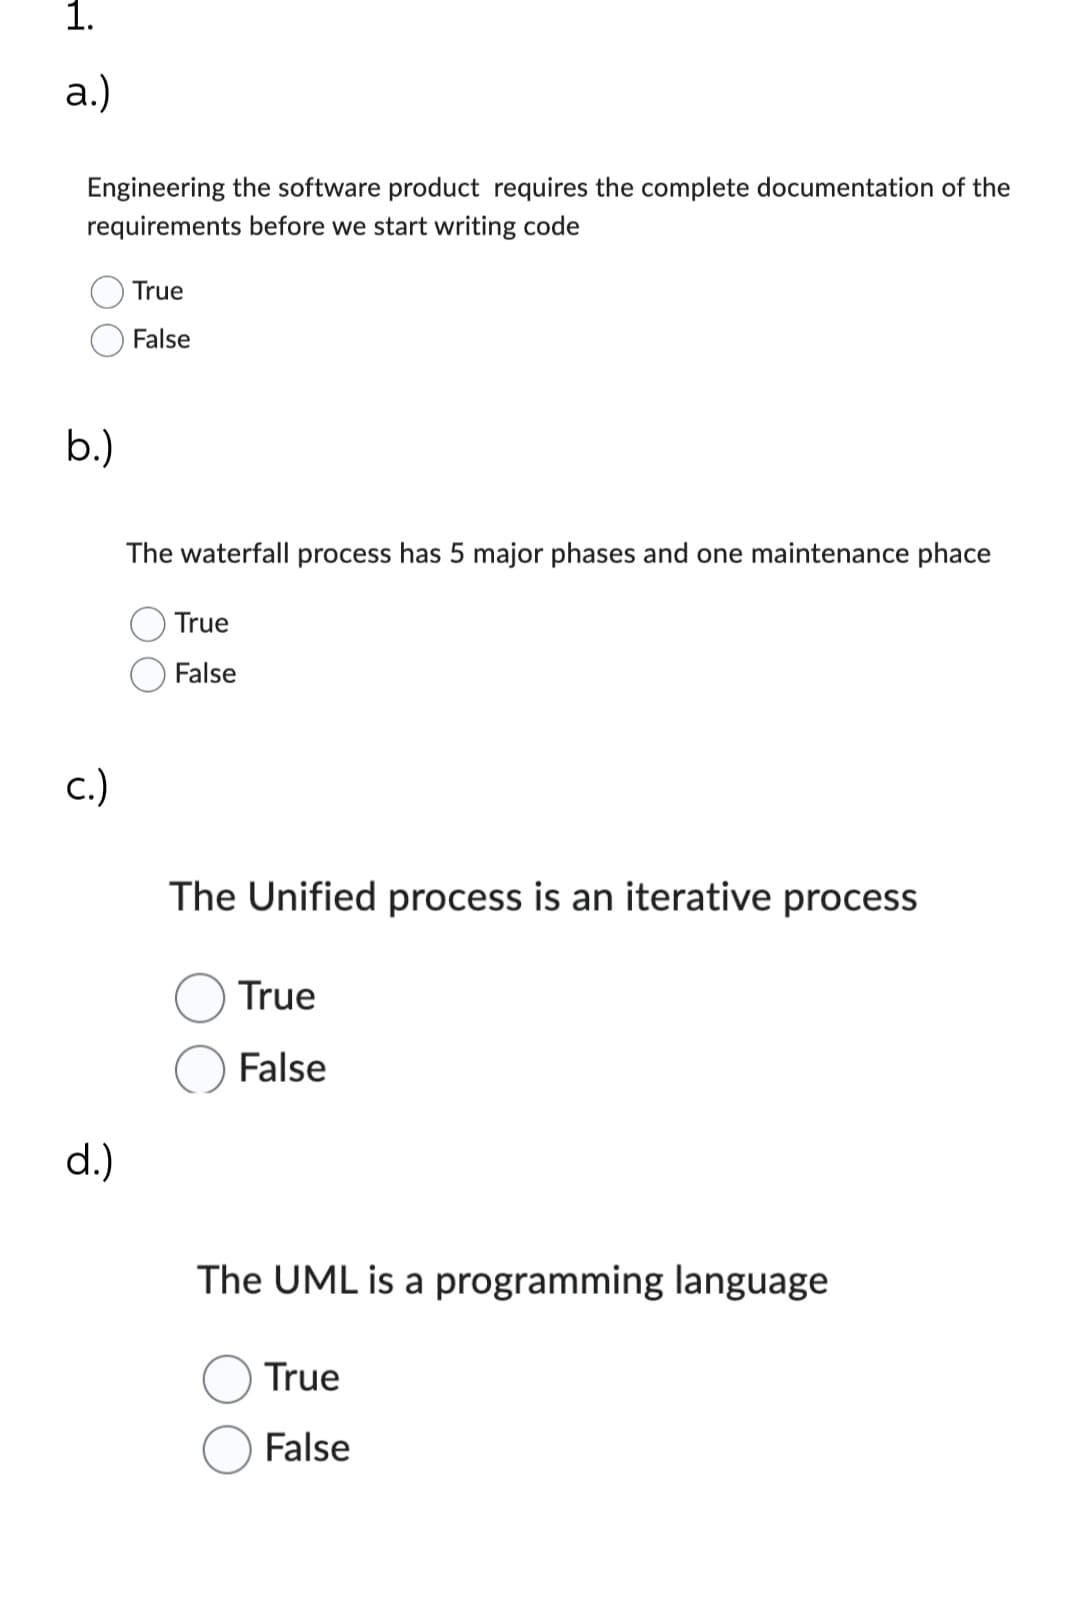 1.
a.)
Engineering the software product requires the complete documentation of the
requirements before we start writing code
b.)
c.)
d.)
True
False
The waterfall process has 5 major phases and one maintenance phace
True
False
The Unified process is an iterative process
True
False
The UML is a programming language
True
False